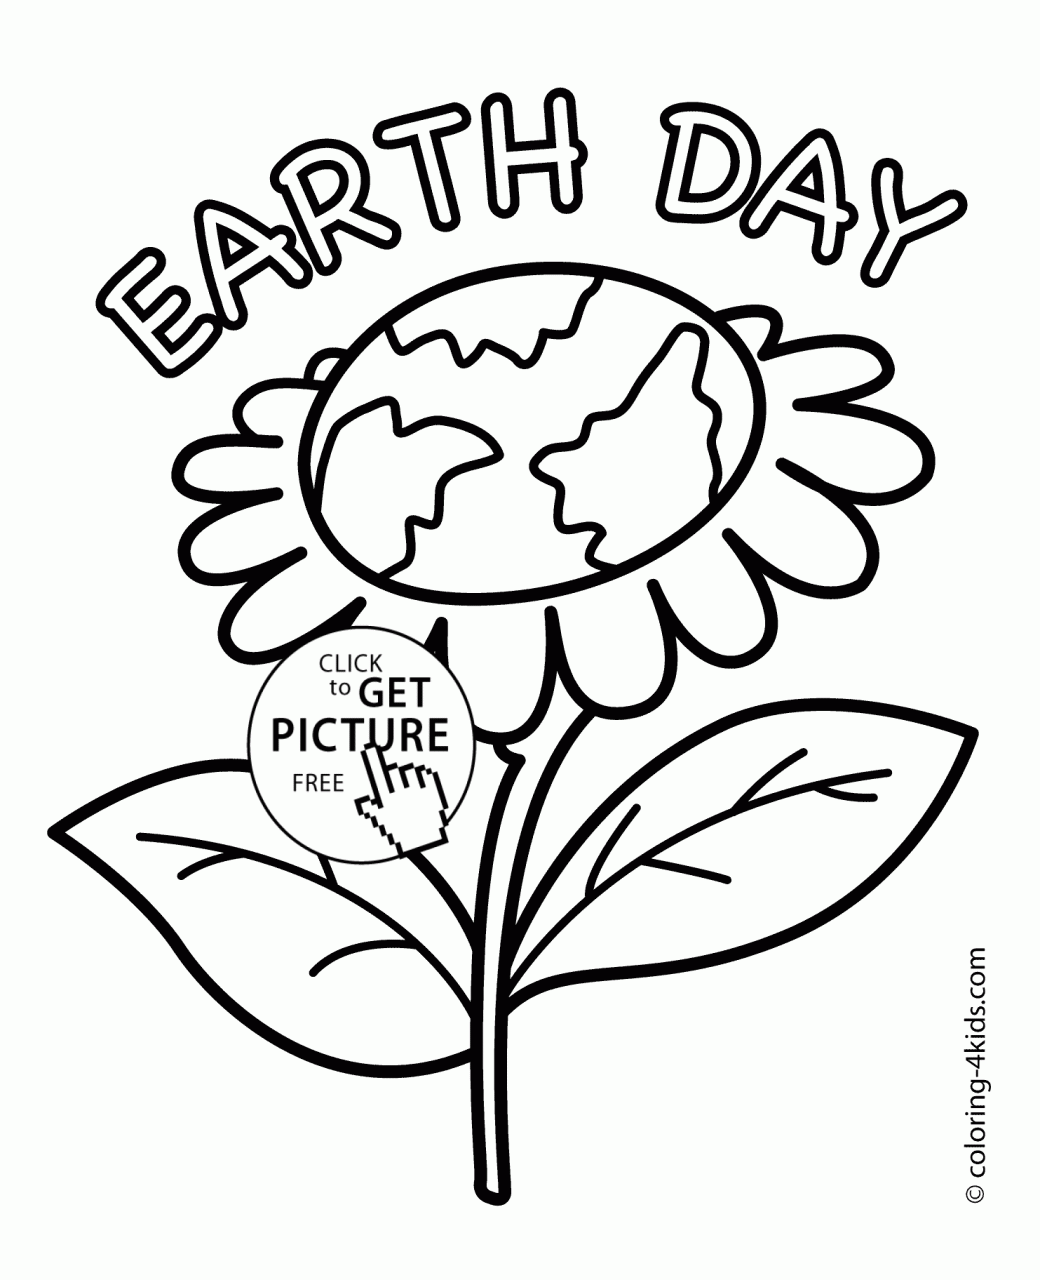 Earth Day flower coloring pages for kids today, printable free